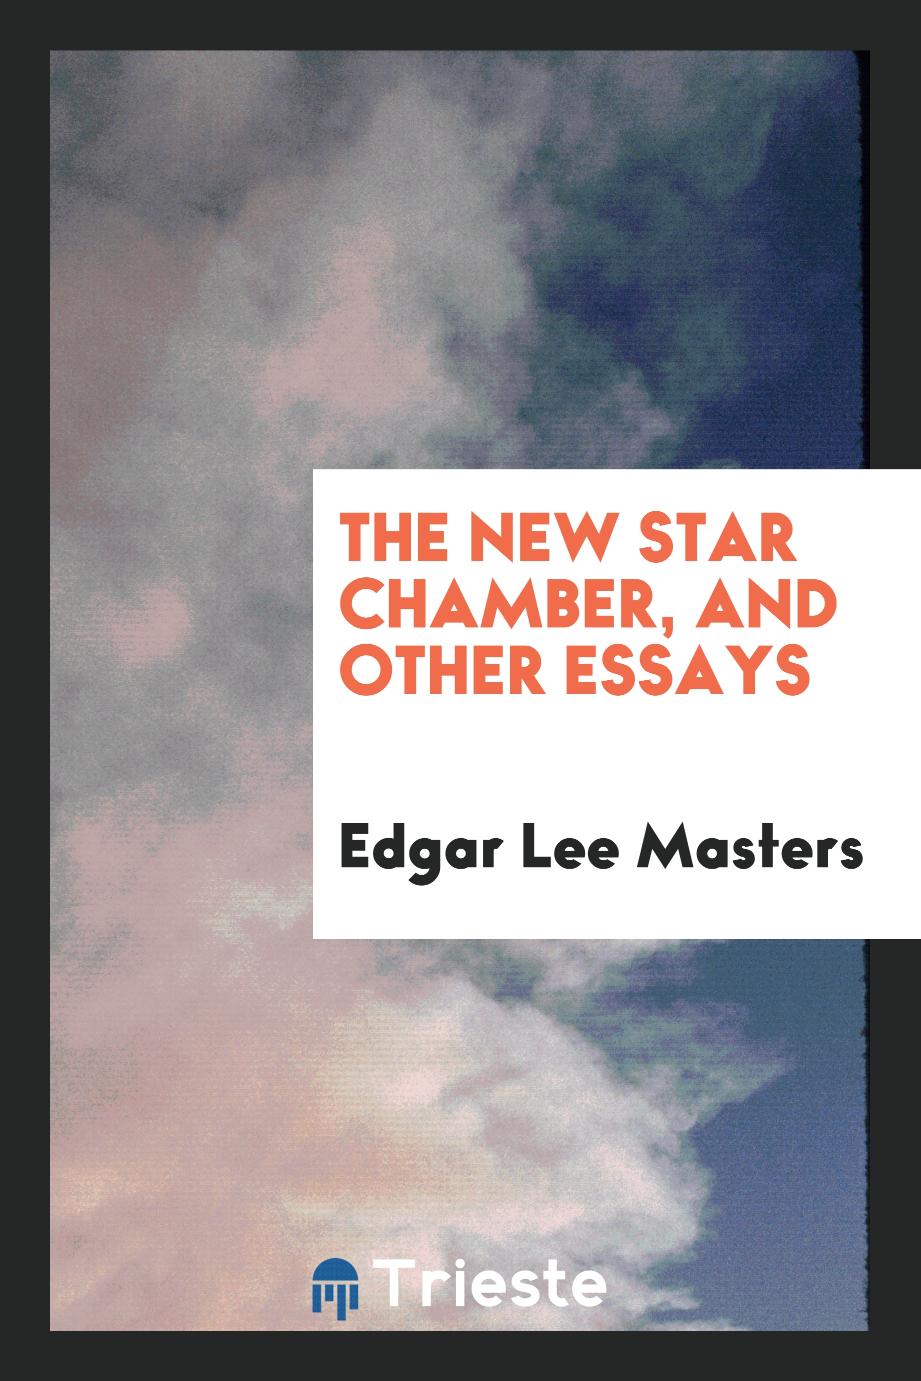 The new star chamber, and other essays